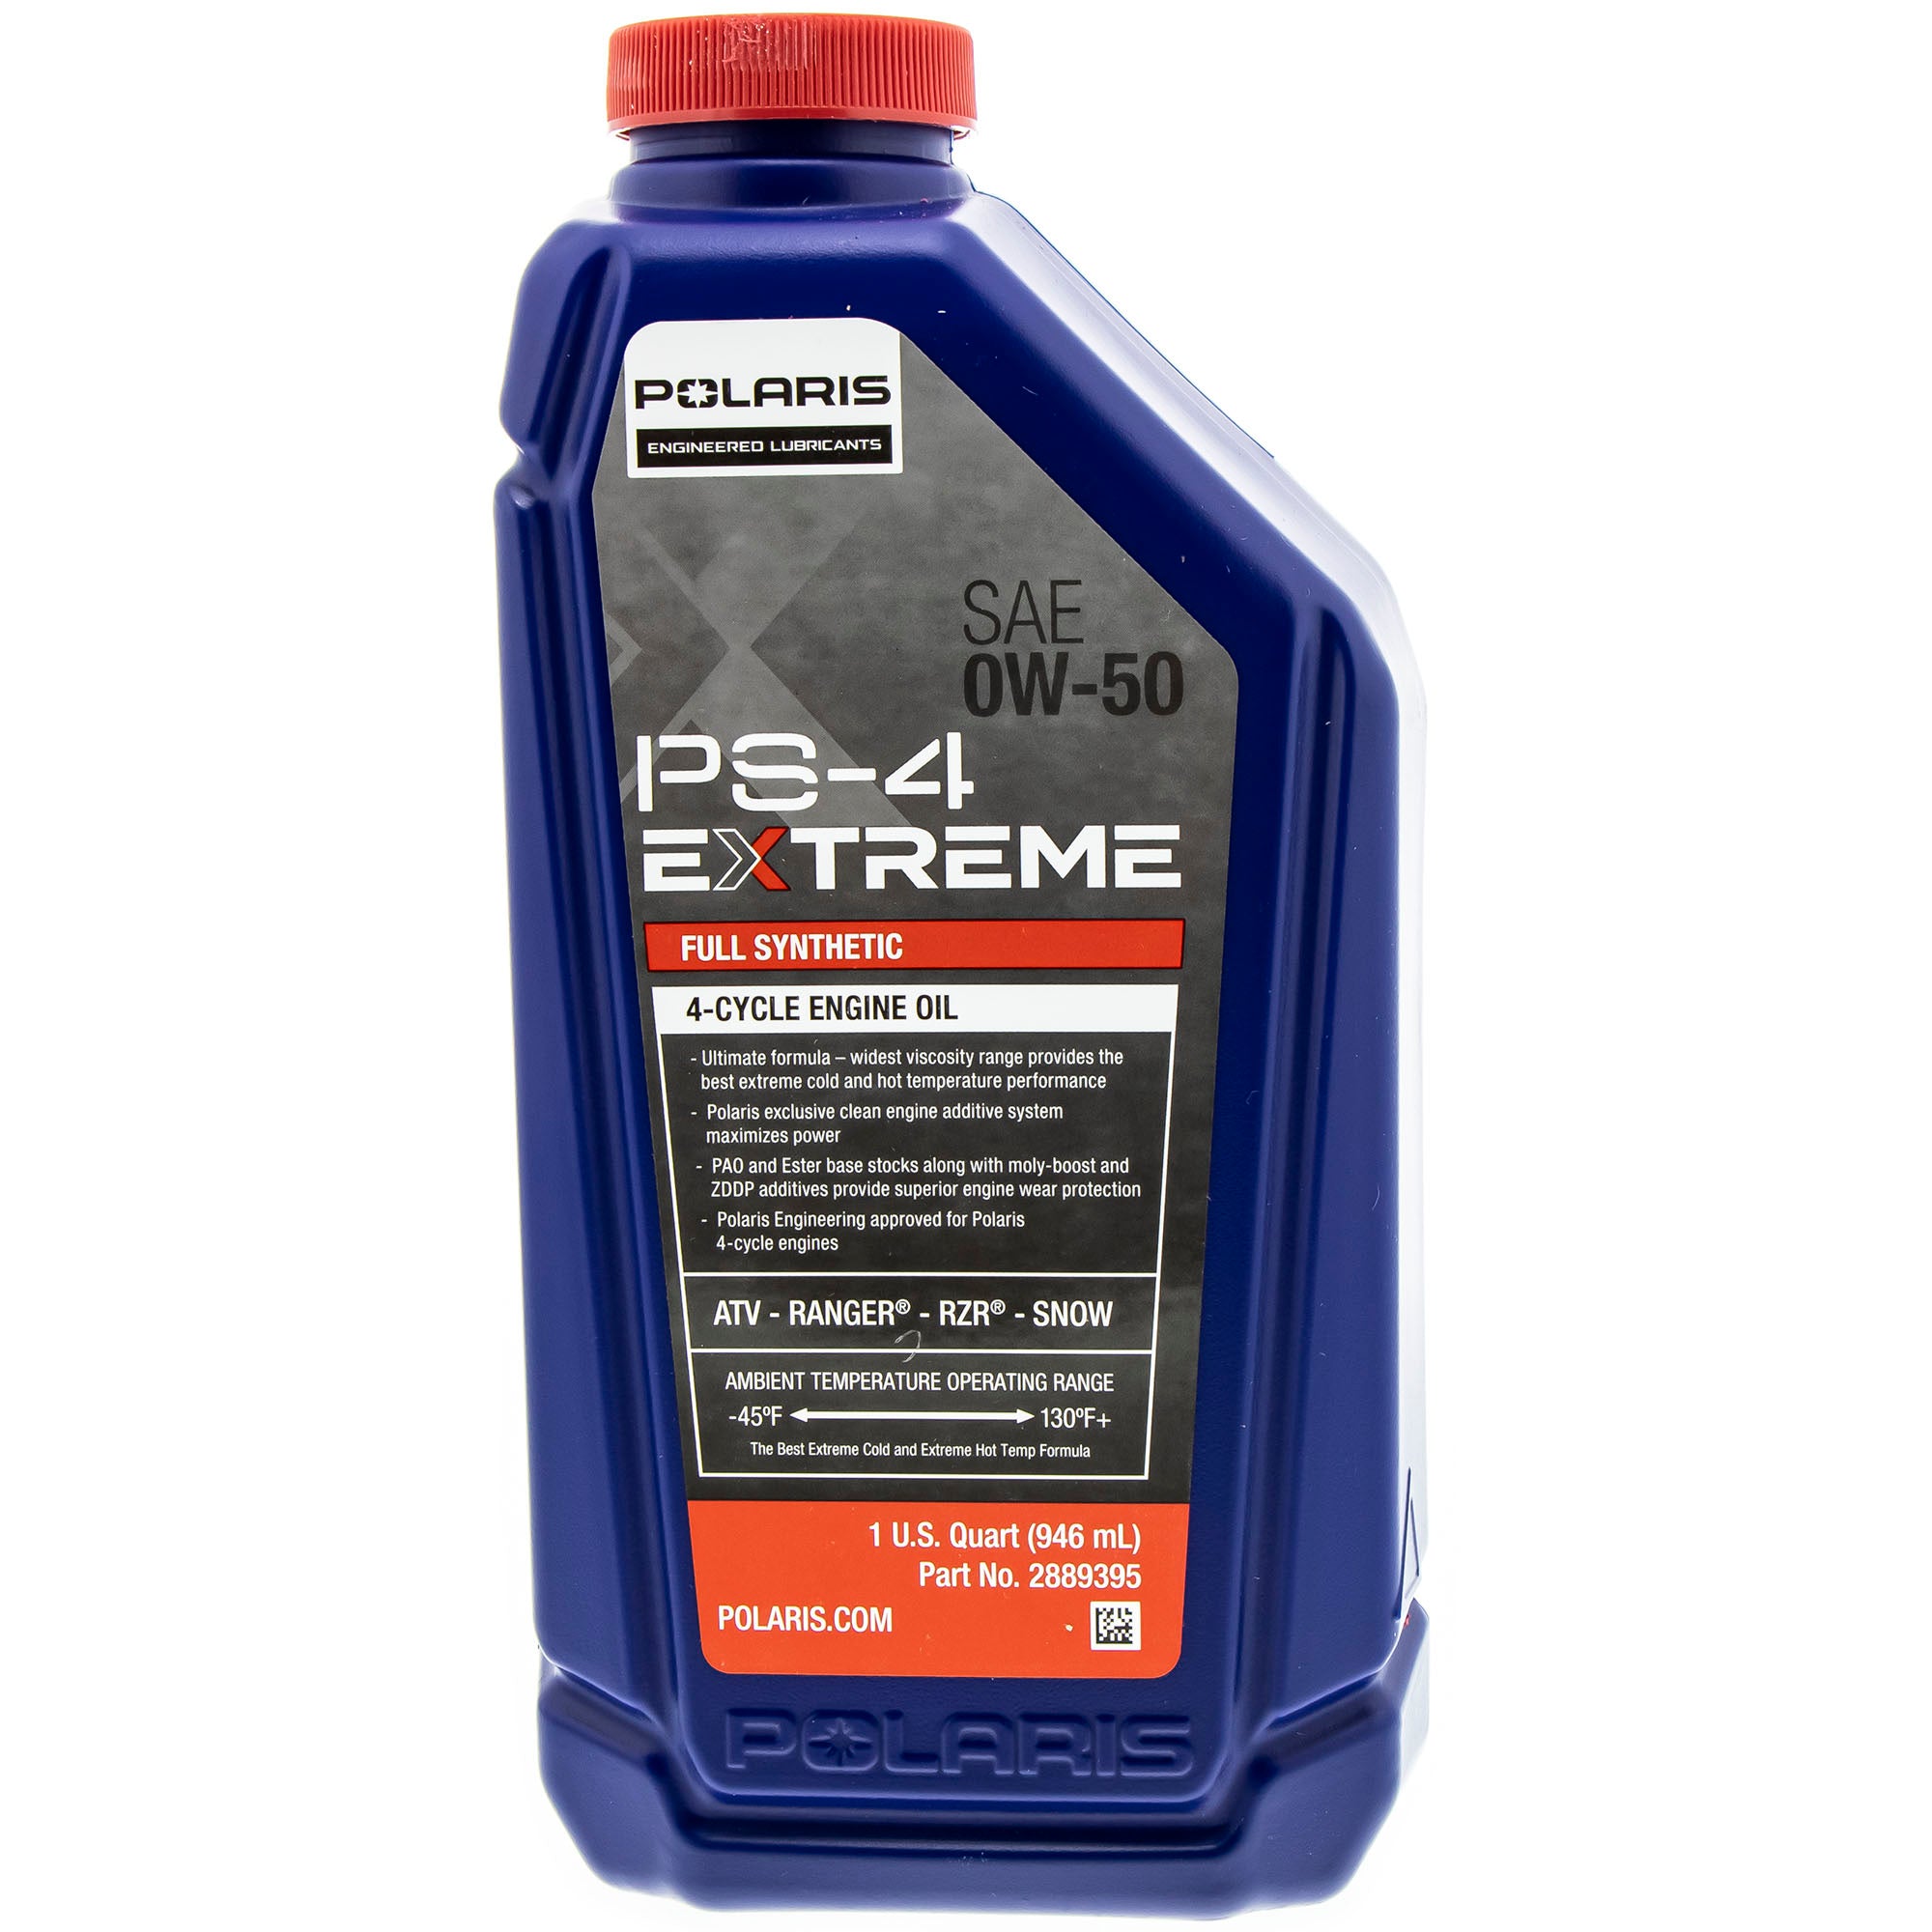 Polaris FKFSK20118 PS-4 Extreme Synthetic Full Service Oil Change Kit with Filter Demand